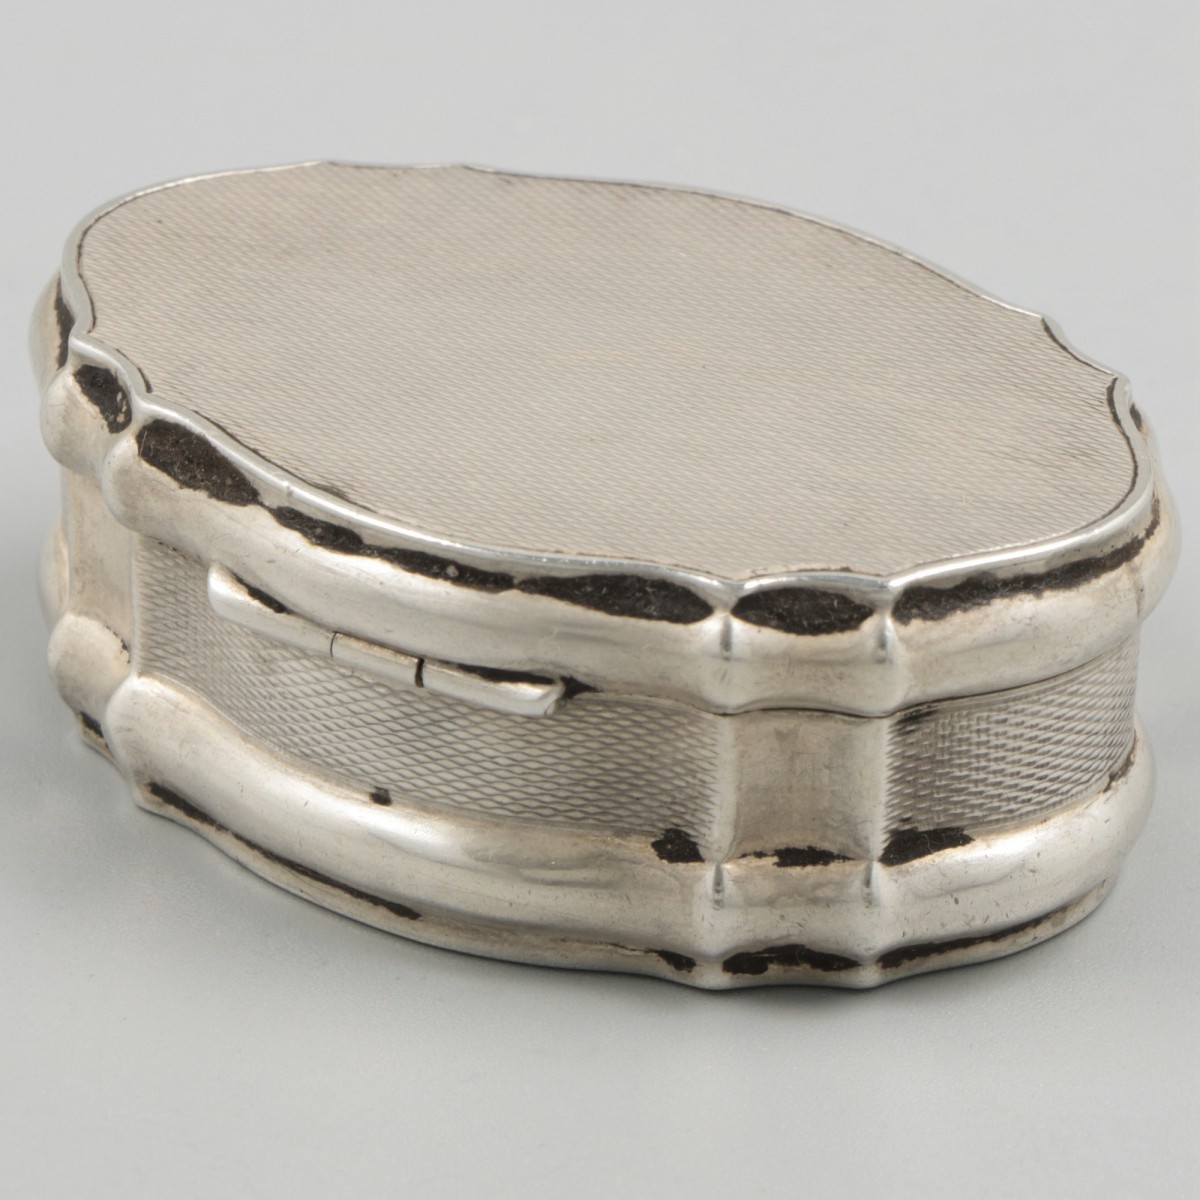 Peppermint / pill box silver. - Image 3 of 5